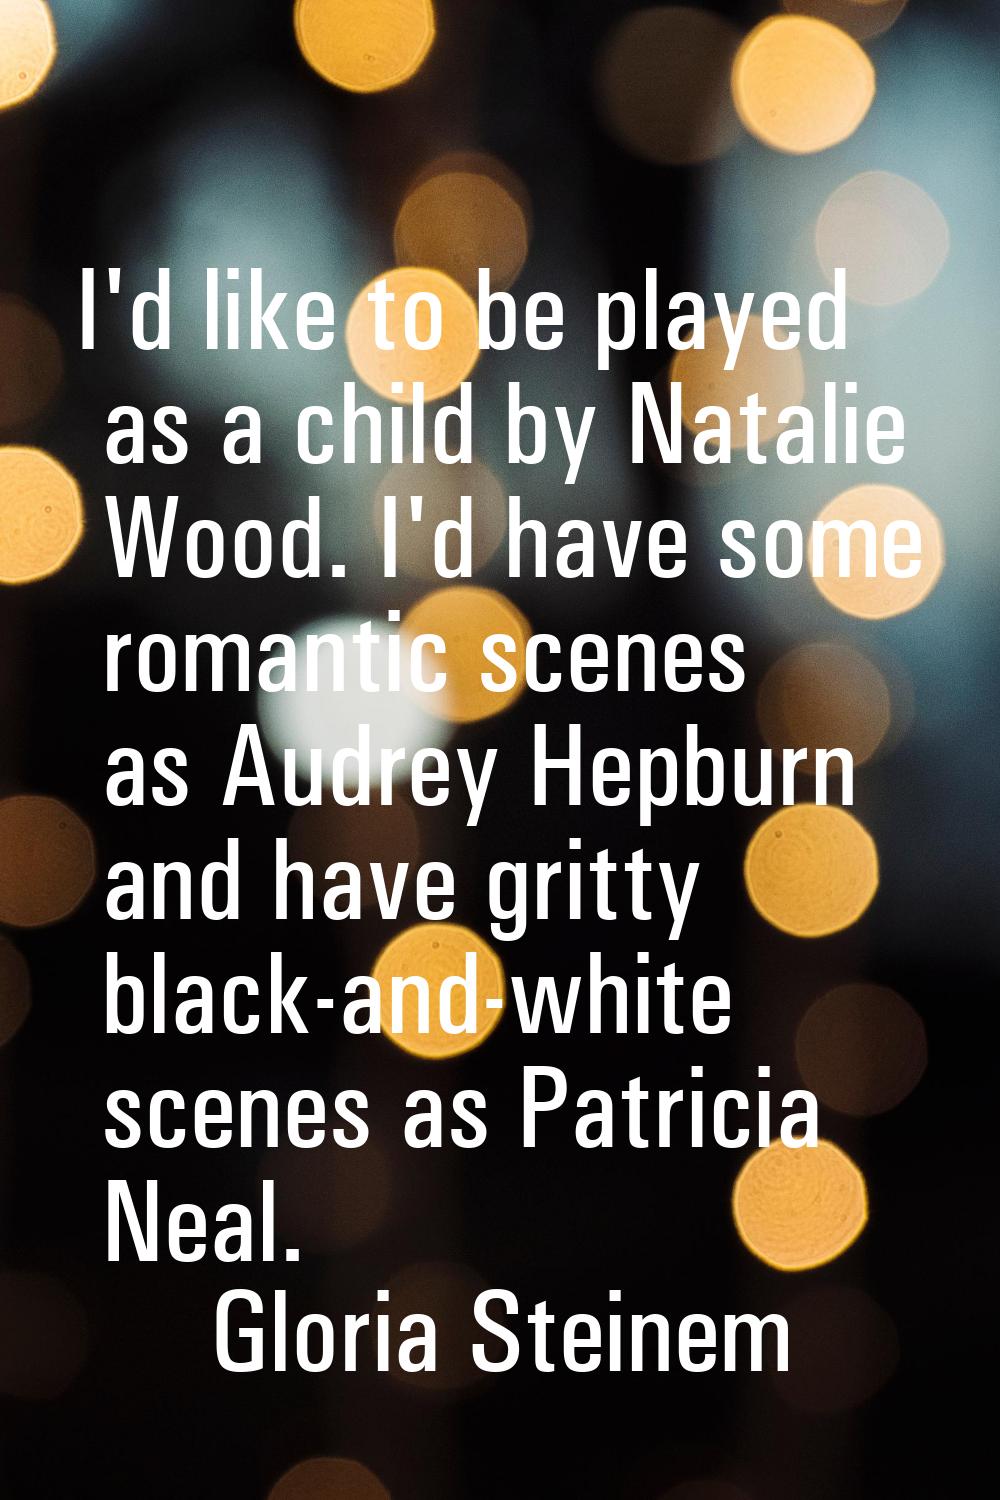 I'd like to be played as a child by Natalie Wood. I'd have some romantic scenes as Audrey Hepburn a